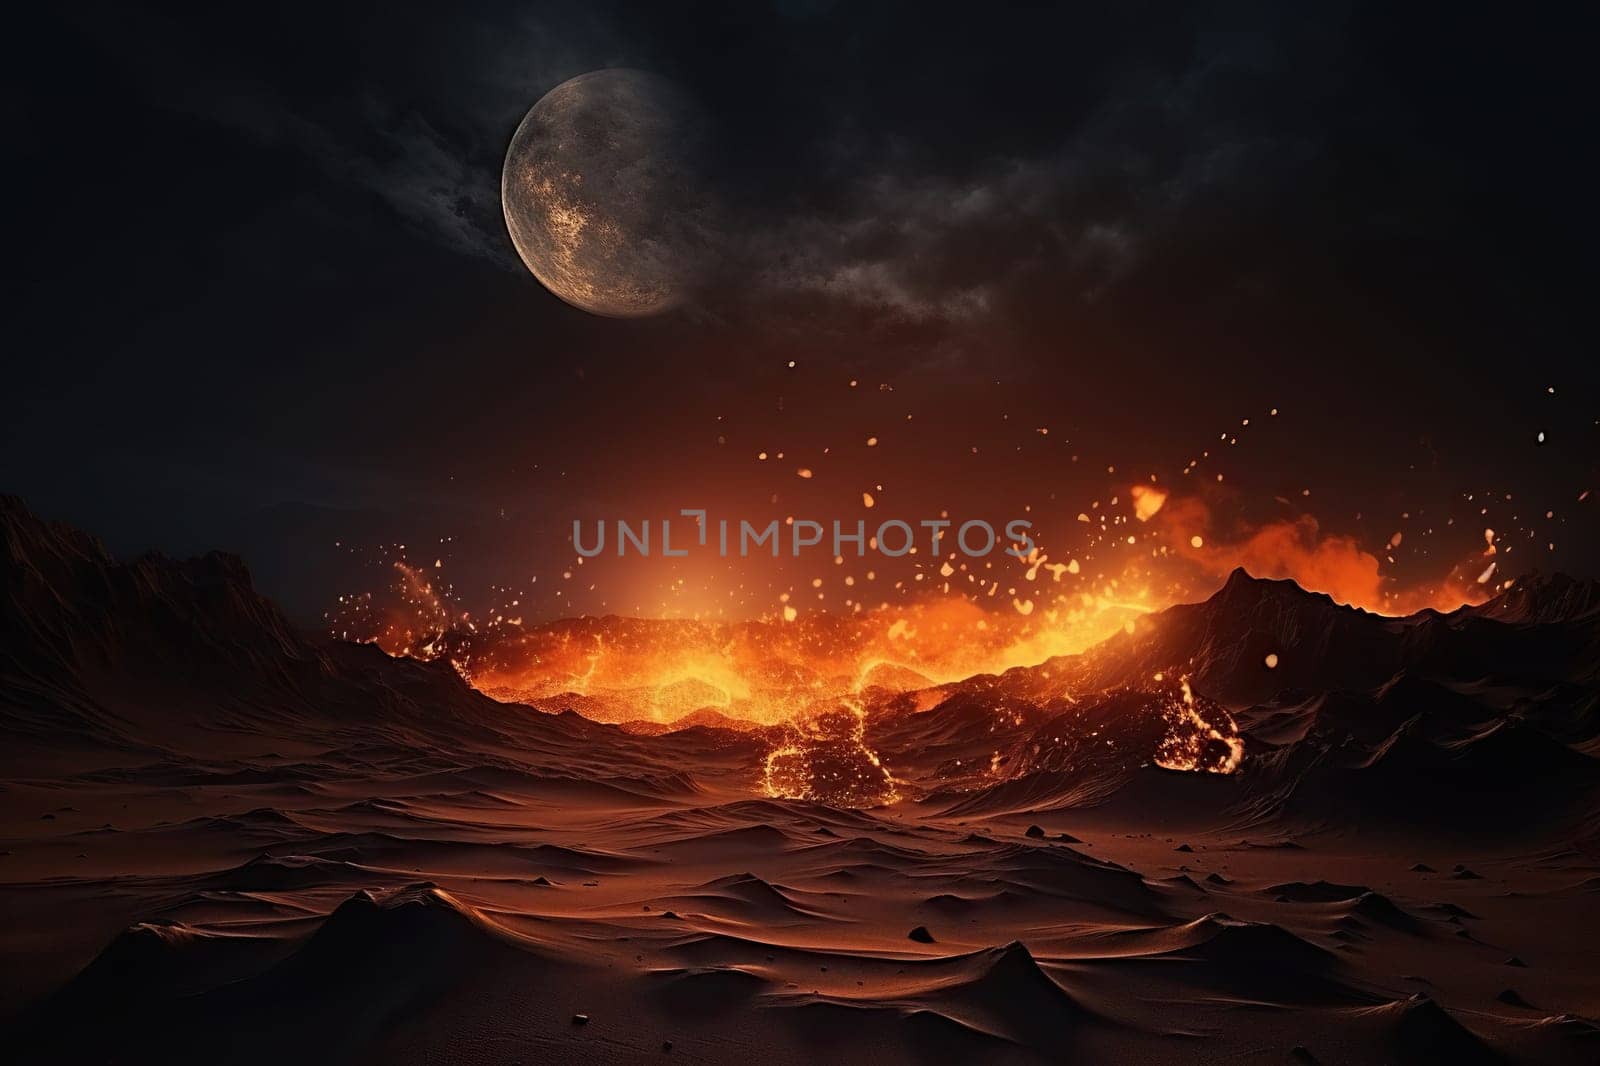 Night desert with fires on the sand in the light of a bright moon on a cloudy sky. Generated by artificial intelligence by Vovmar